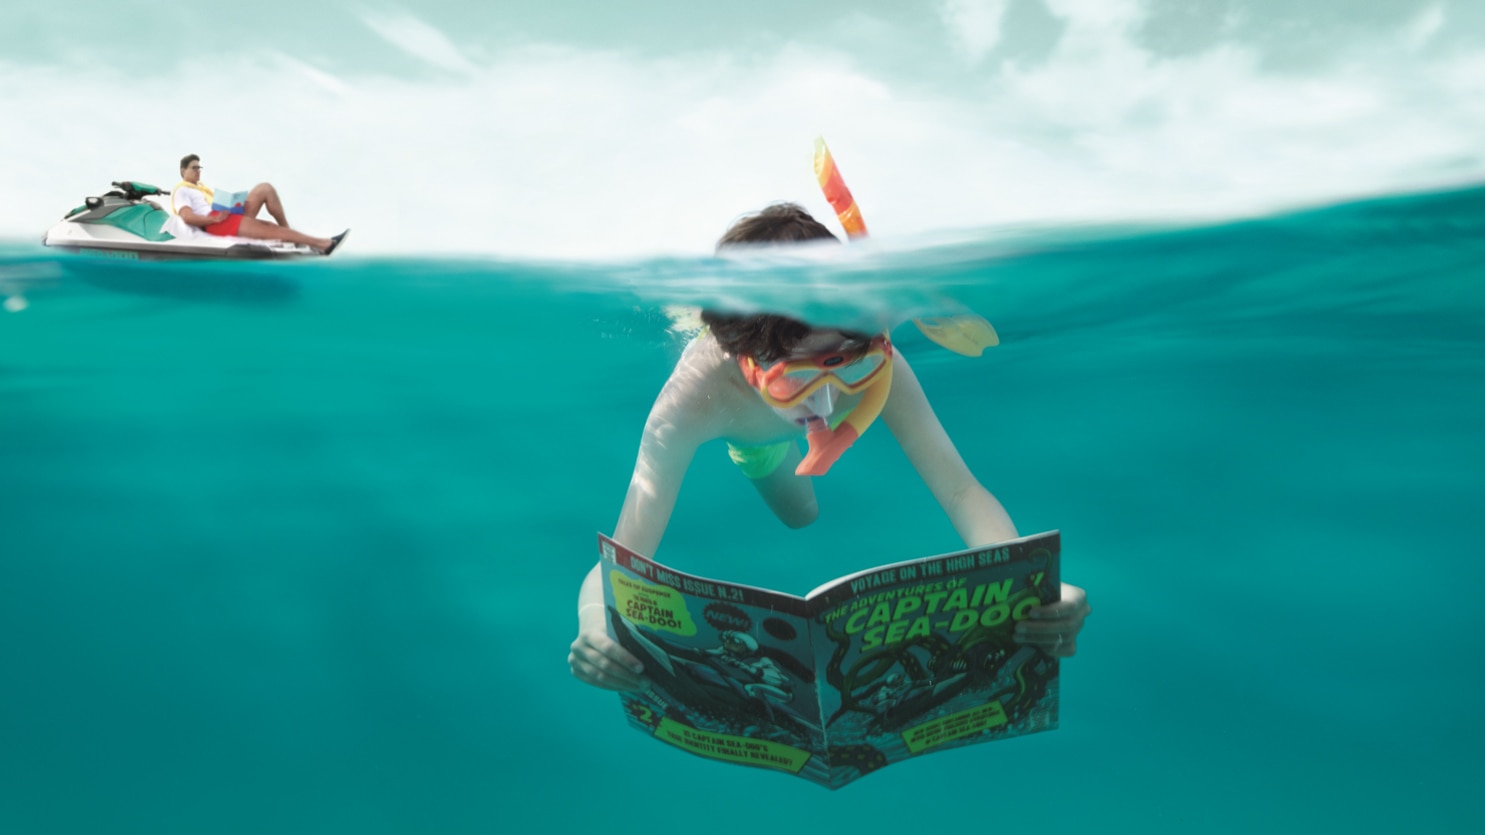 A young kid reading an edition of Captain Sea-Doo underwater